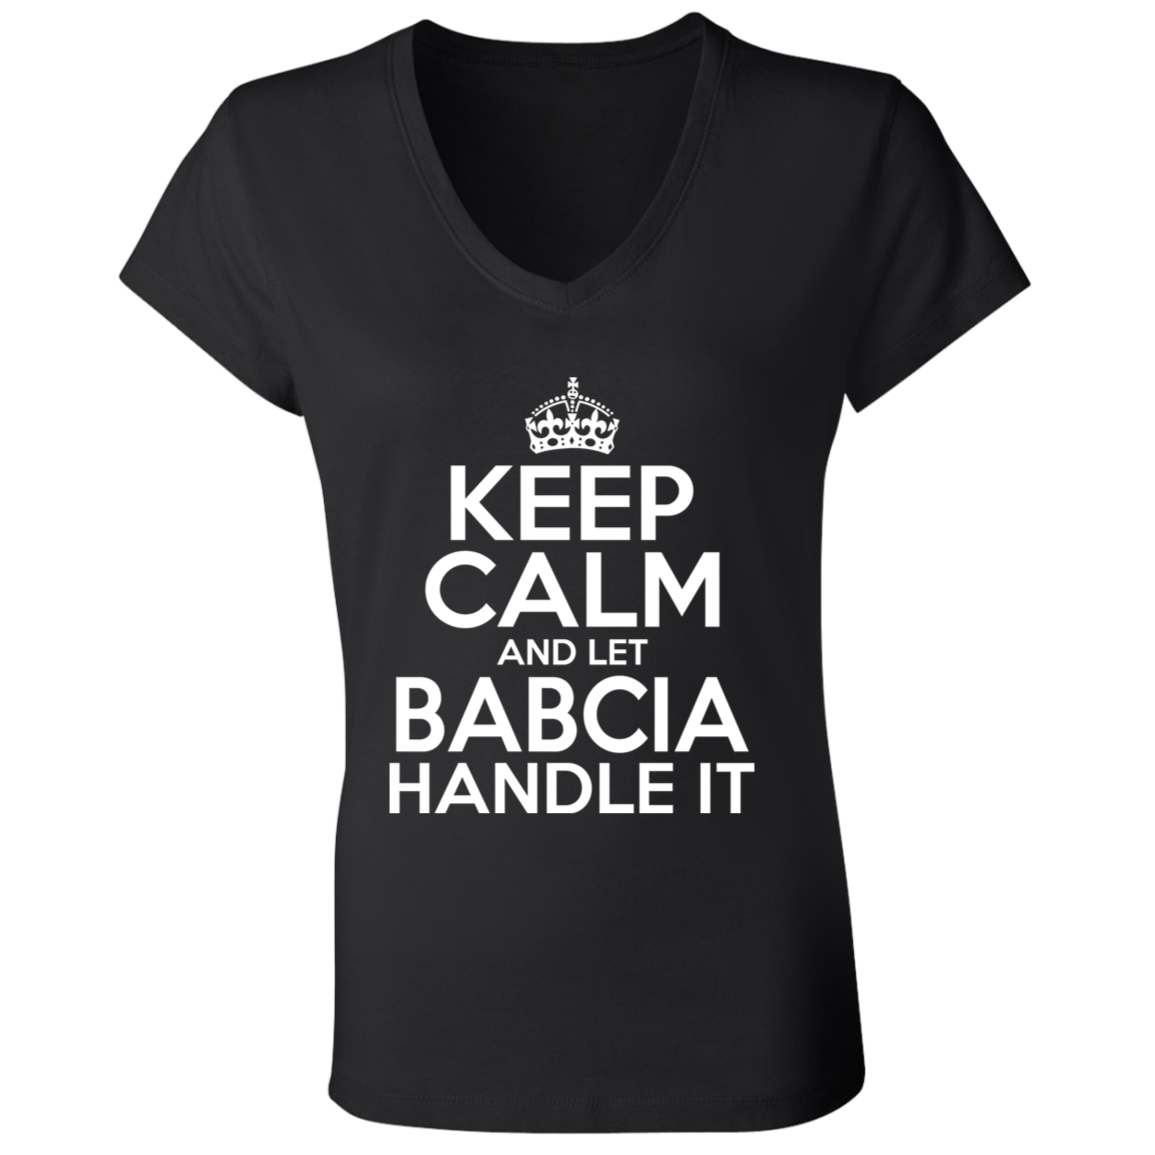 Keep Calm And Let Babcia Handle It Apparel CustomCat B6005 Ladies' Jersey V-Neck T-Shirt Black S